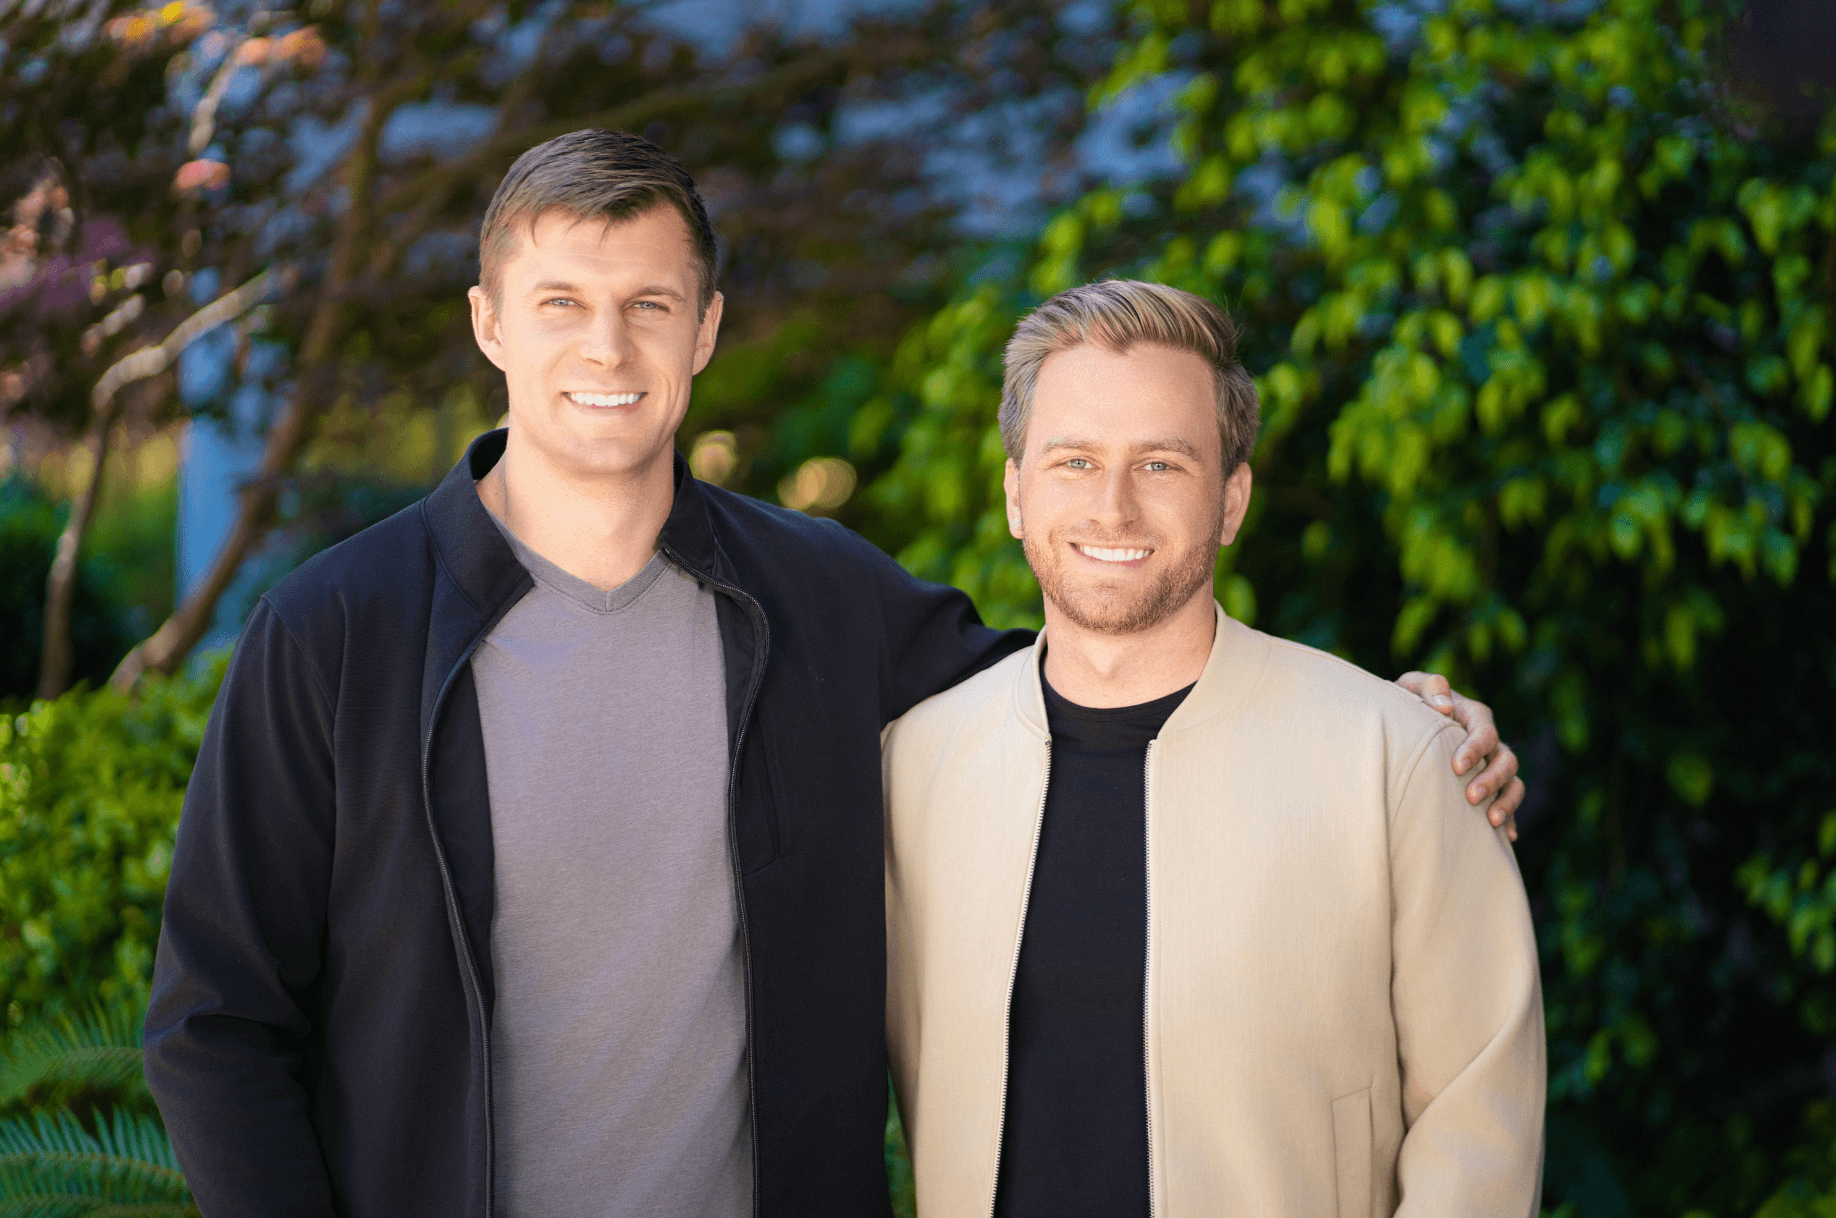 PearX S19 alum Learn to Win raises $30M to continue helping large clients use data analytics and AI to improve training and onboarding